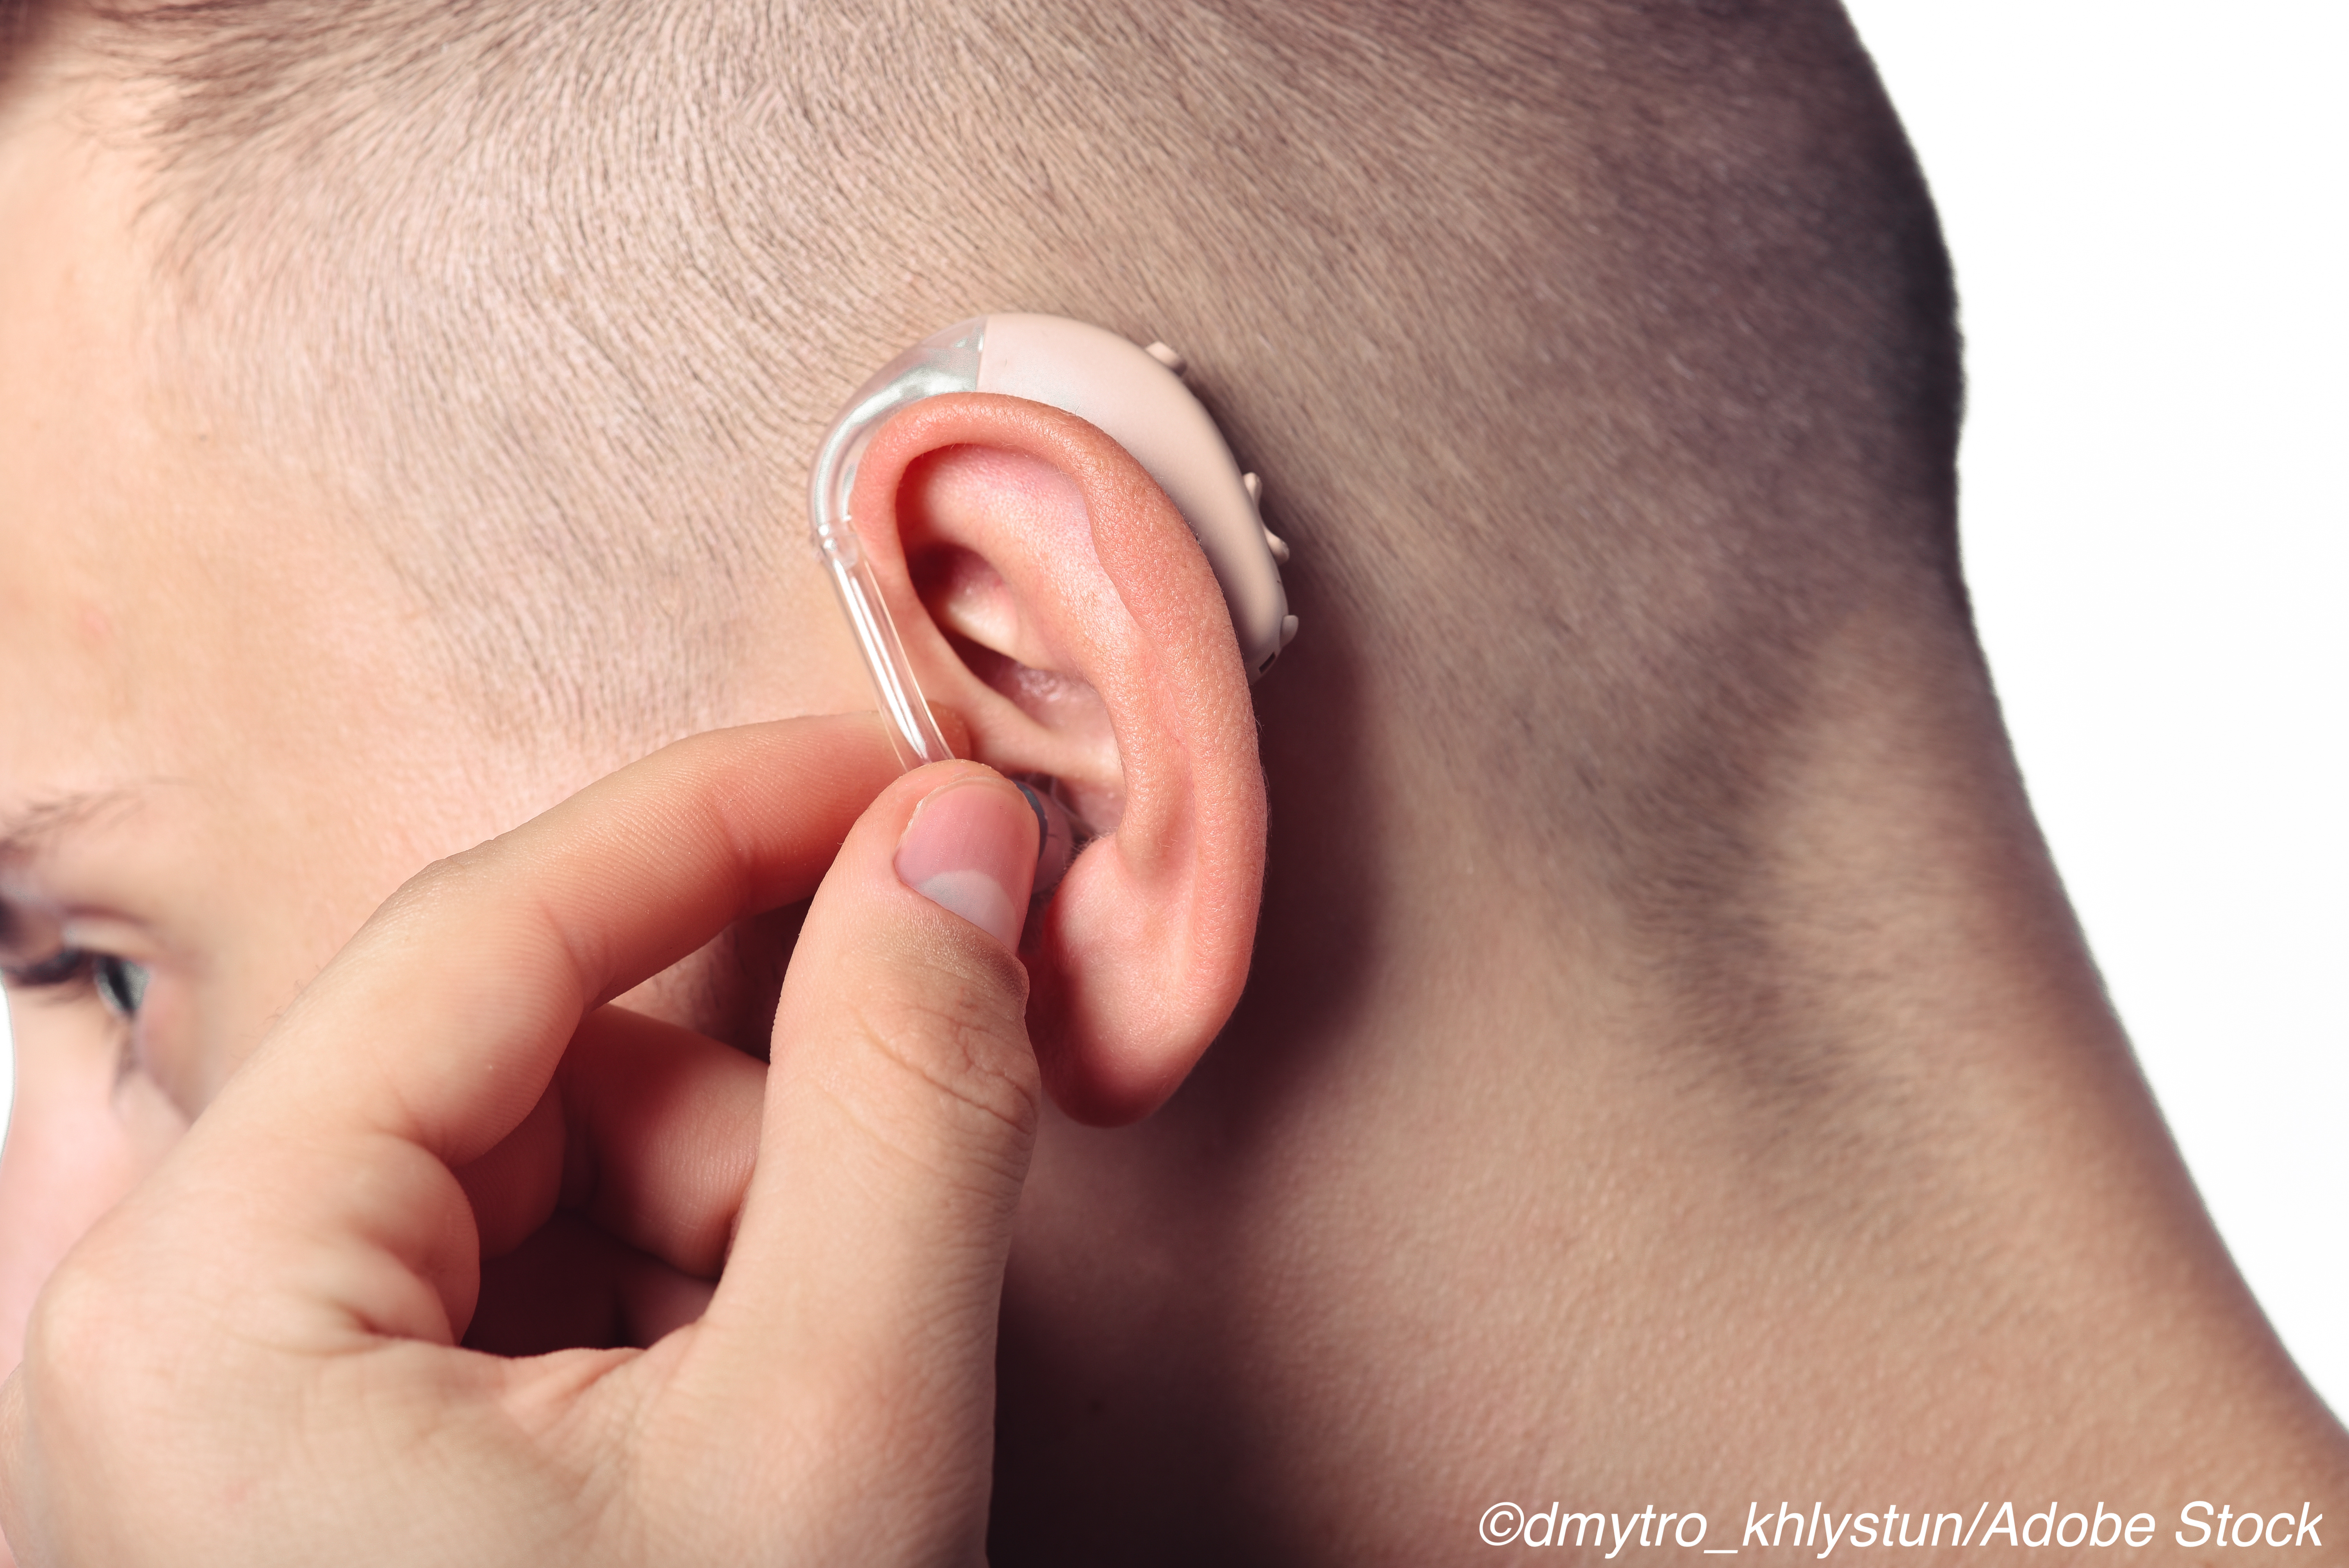 Hearing Impairment Resulting from Childhood Ca TX Increases Risk for Neurocognitive Deficits